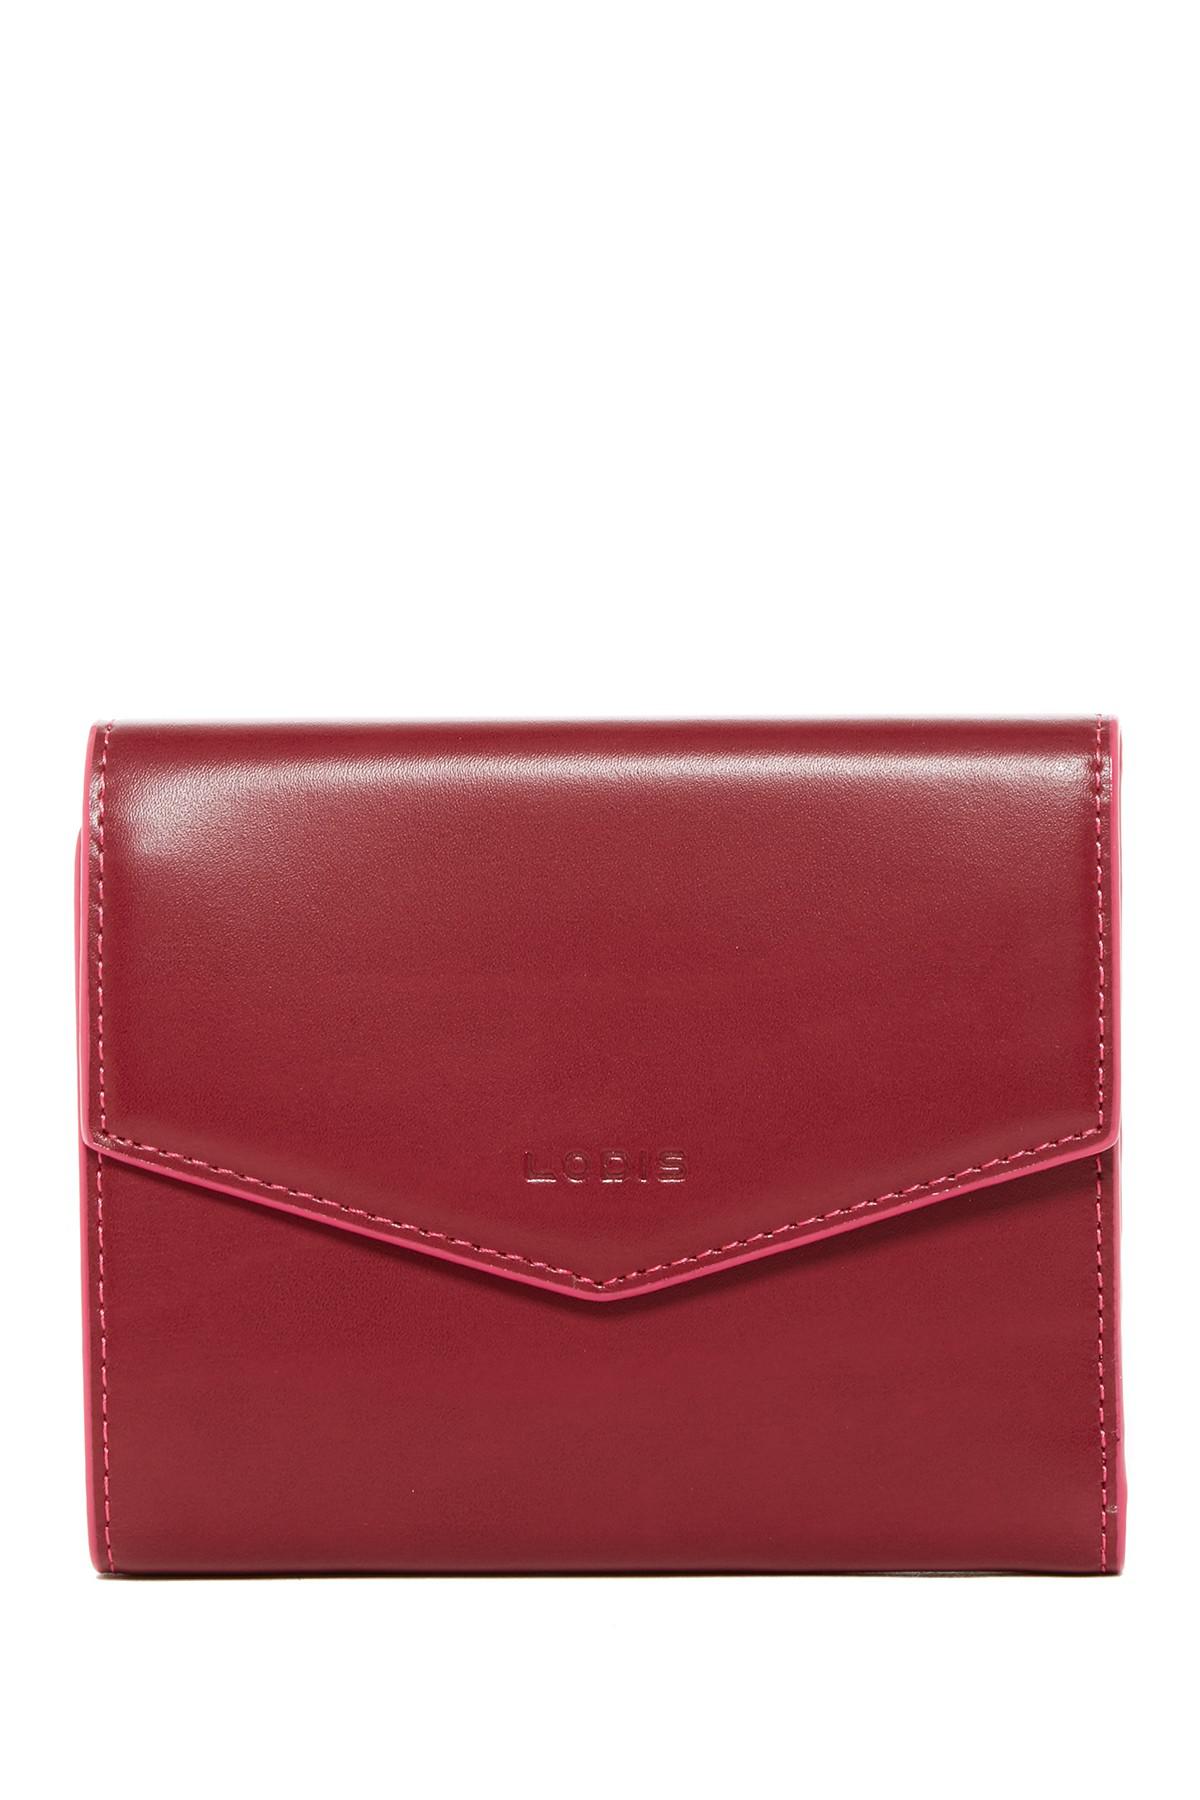 Lodis Lana Trifold Leather Wallet in Red | Lyst